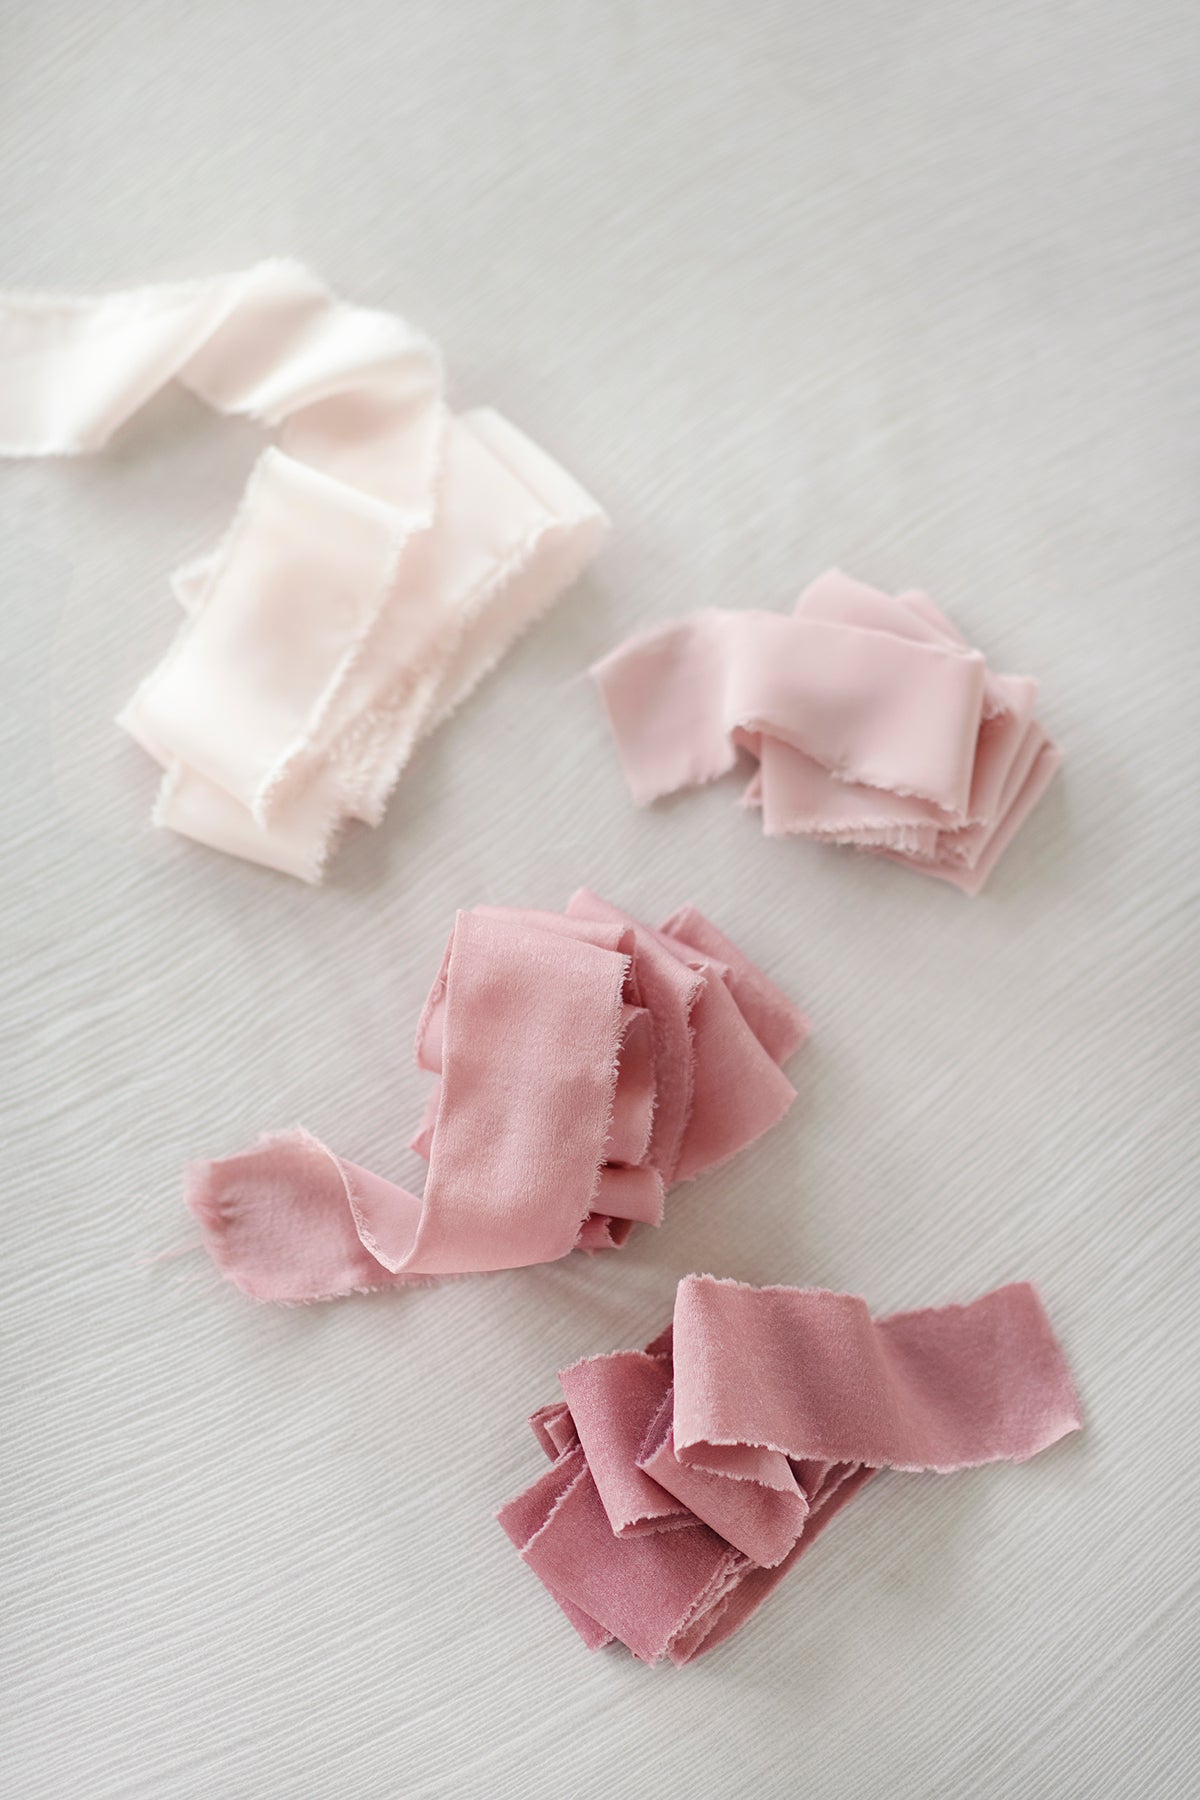 Handmade Frayed Edges Ribbon in Dusty Rose & Mauve – Ling's Moment